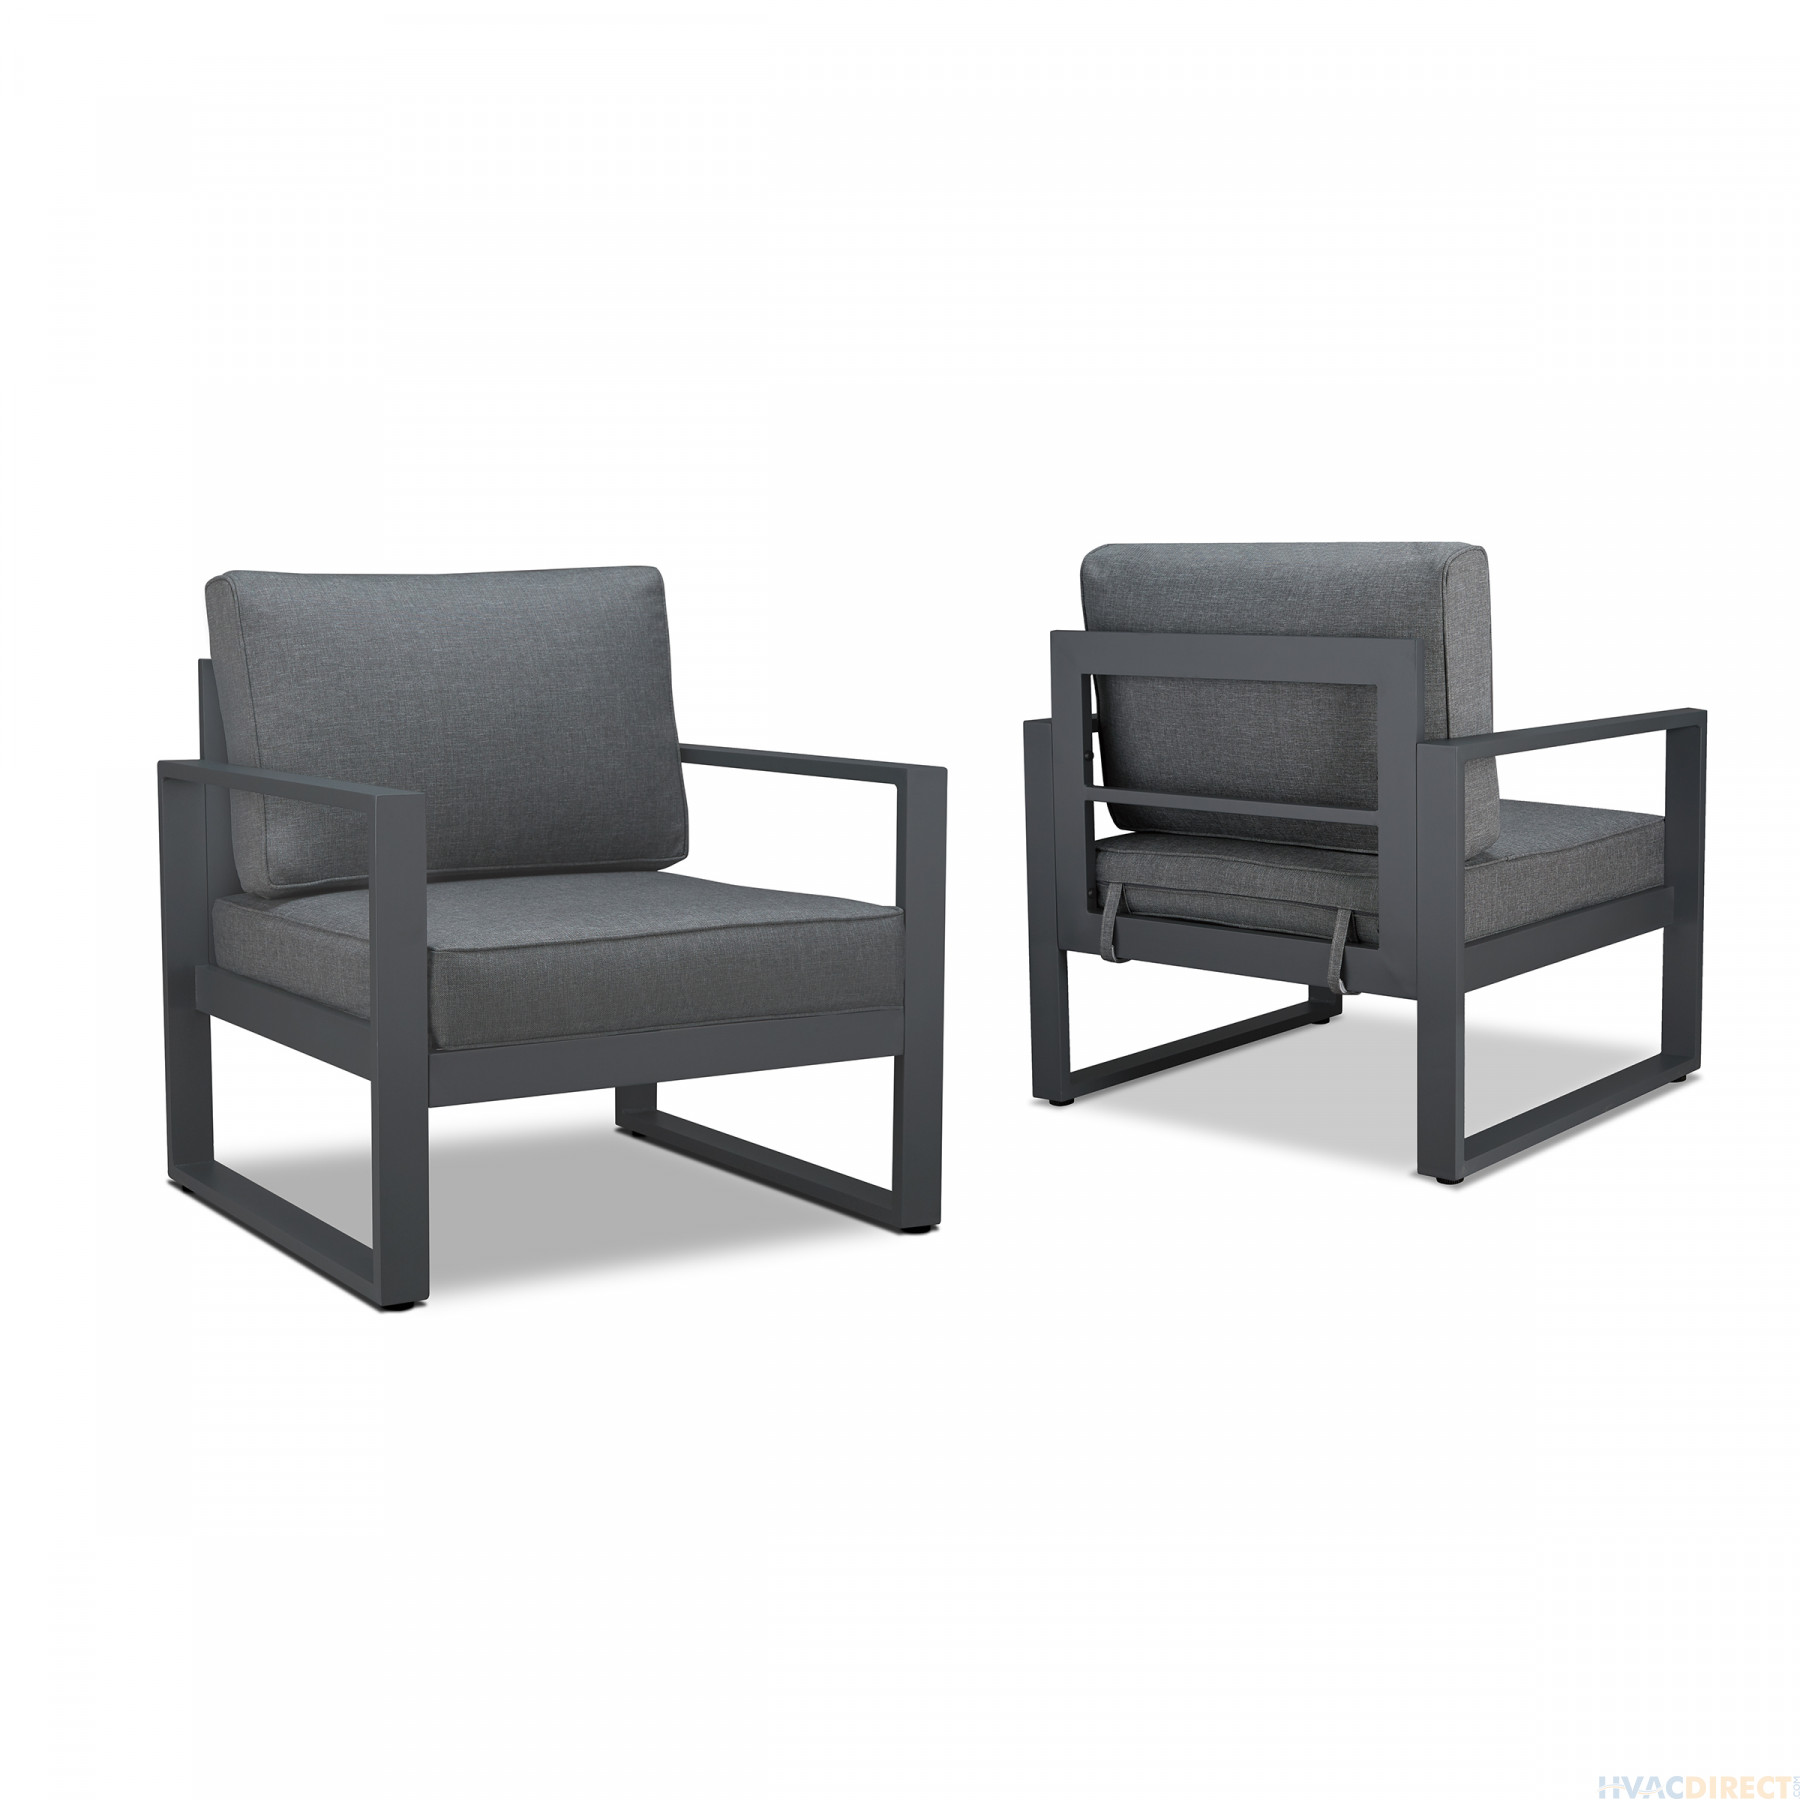 Real Flame Baltic Chair Set (2 Chairs) Gray - 9611-GRY